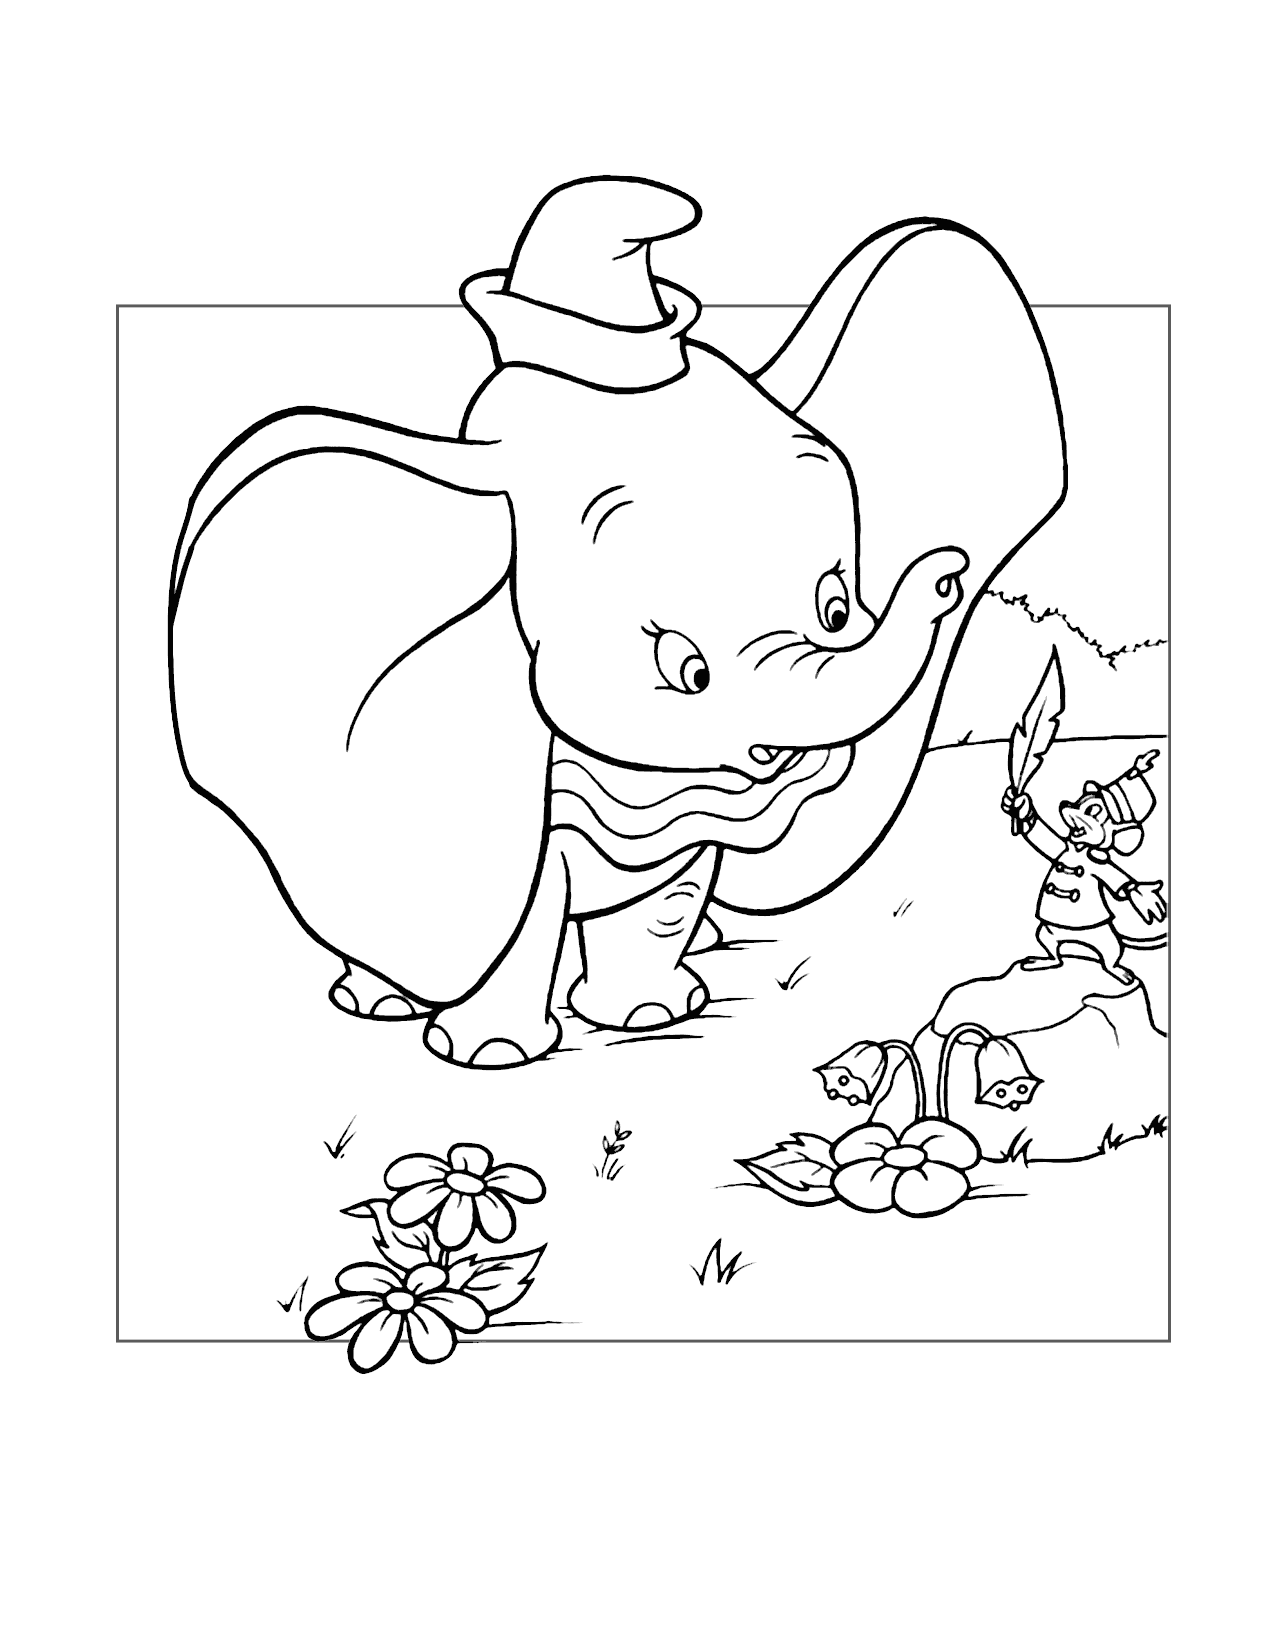 Timothy Gives Dumbo A Feather Coloring Page